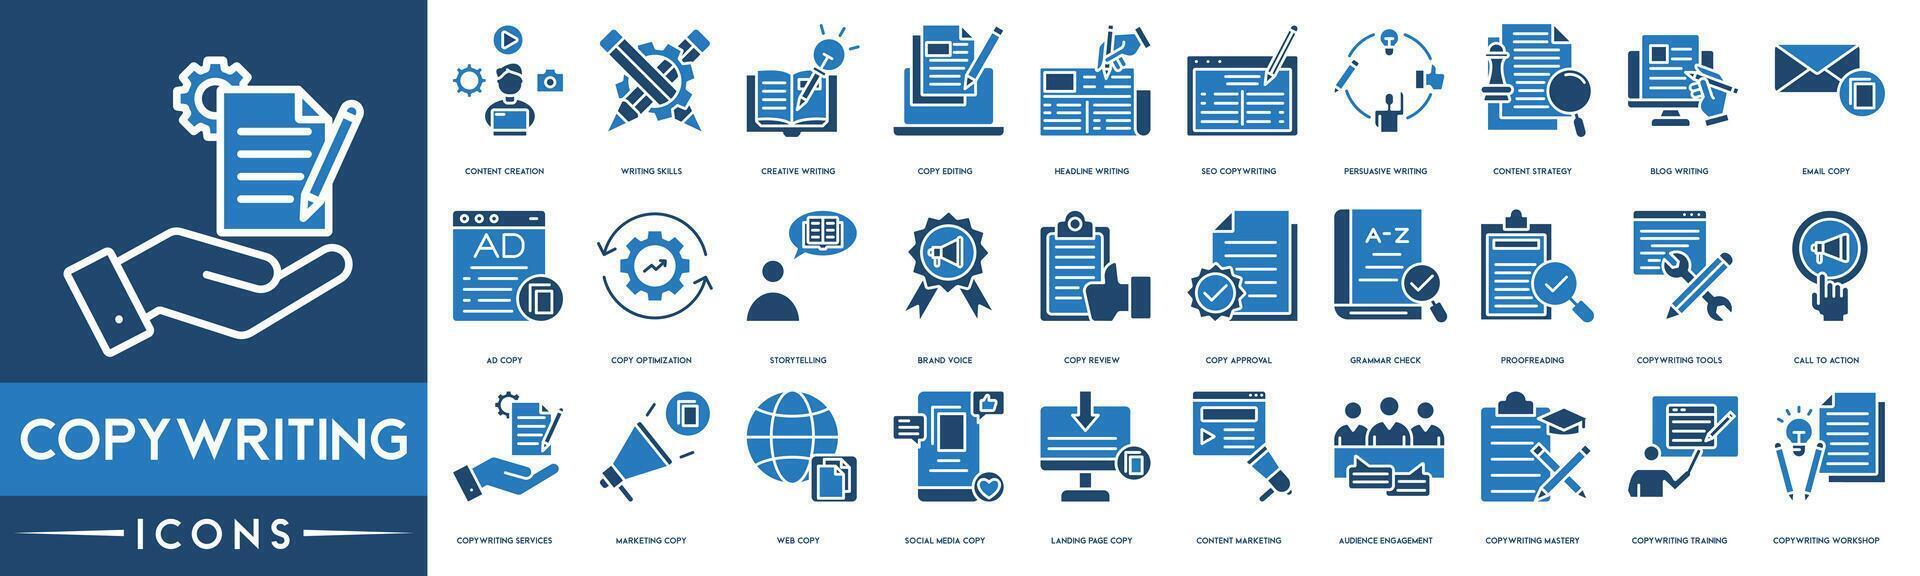 Copywriting icon. Content Creation, Writing Skills, Creative Writing, Copy Editing, Headline Writing, SEO Copywriting, Persuasive Writing, Content Strategy line web icon set. Outline icons collection. vector